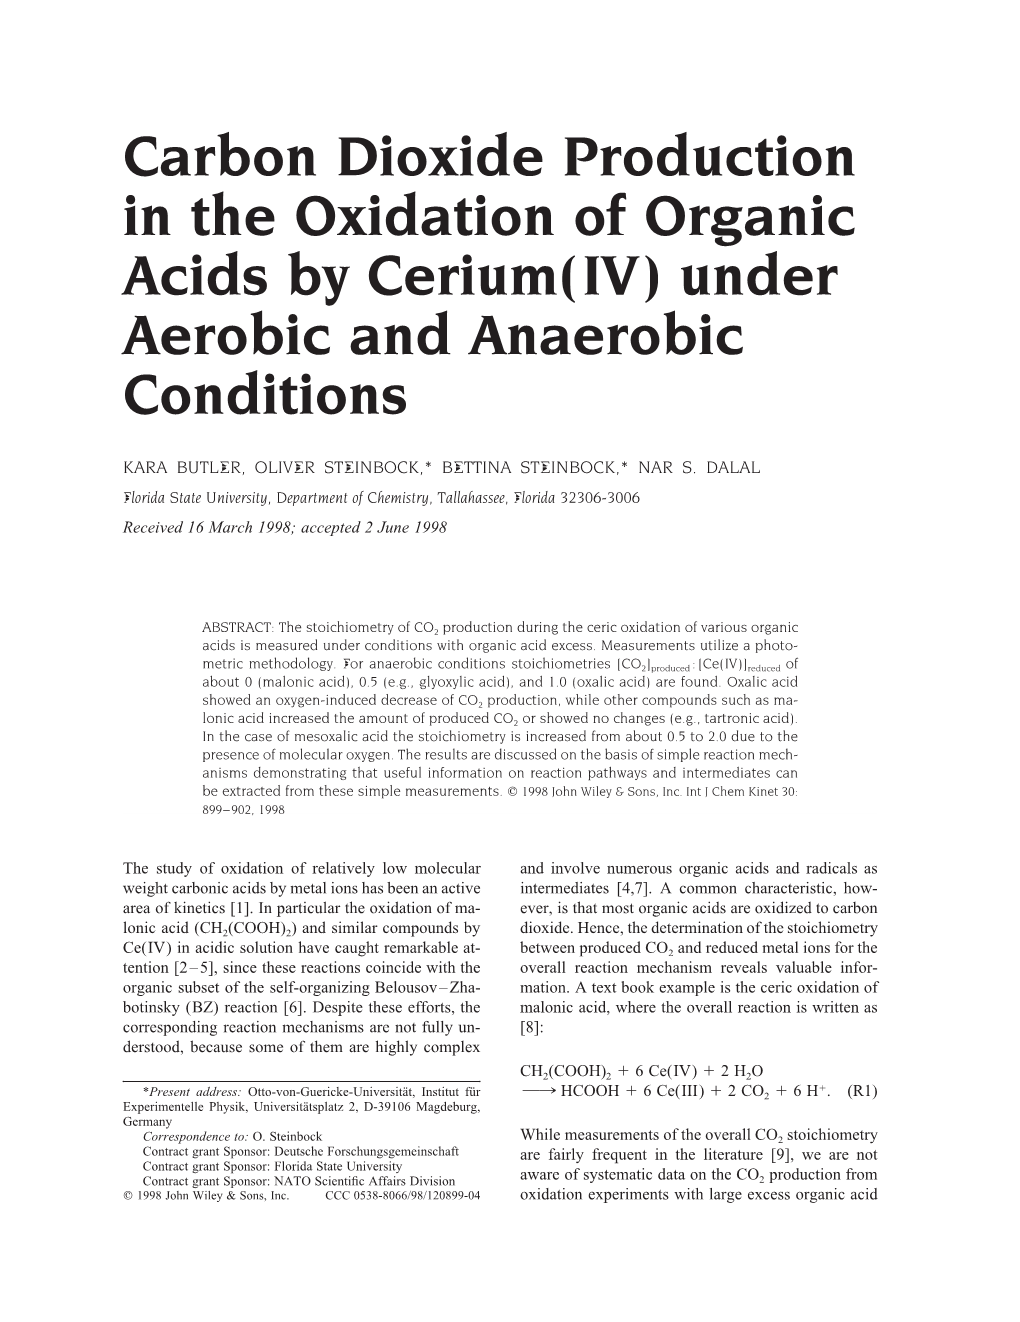 Carbon Dioxide Production in the Oxidation of Organic Acids by Cerium(IV) Under Aerobic and Anaerobic Conditions